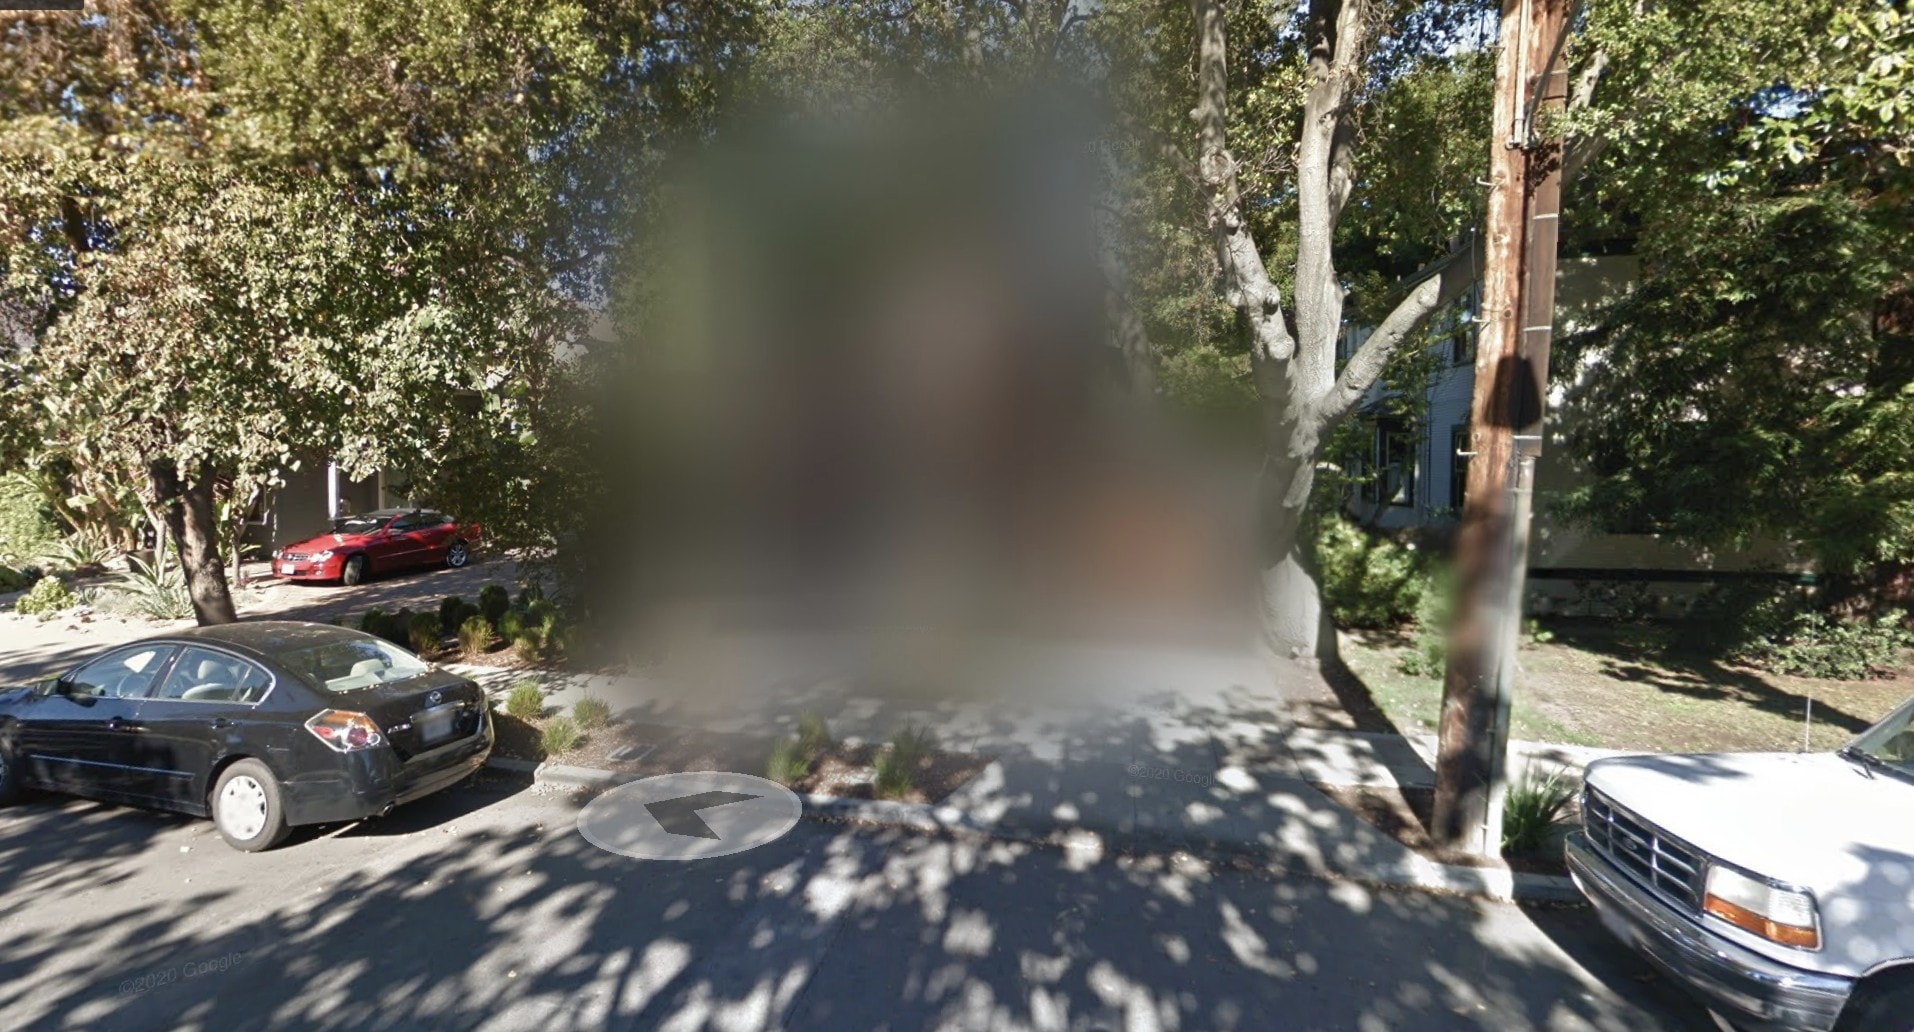 Google Maps blurs out Apple CEO Tim Cook's house, too